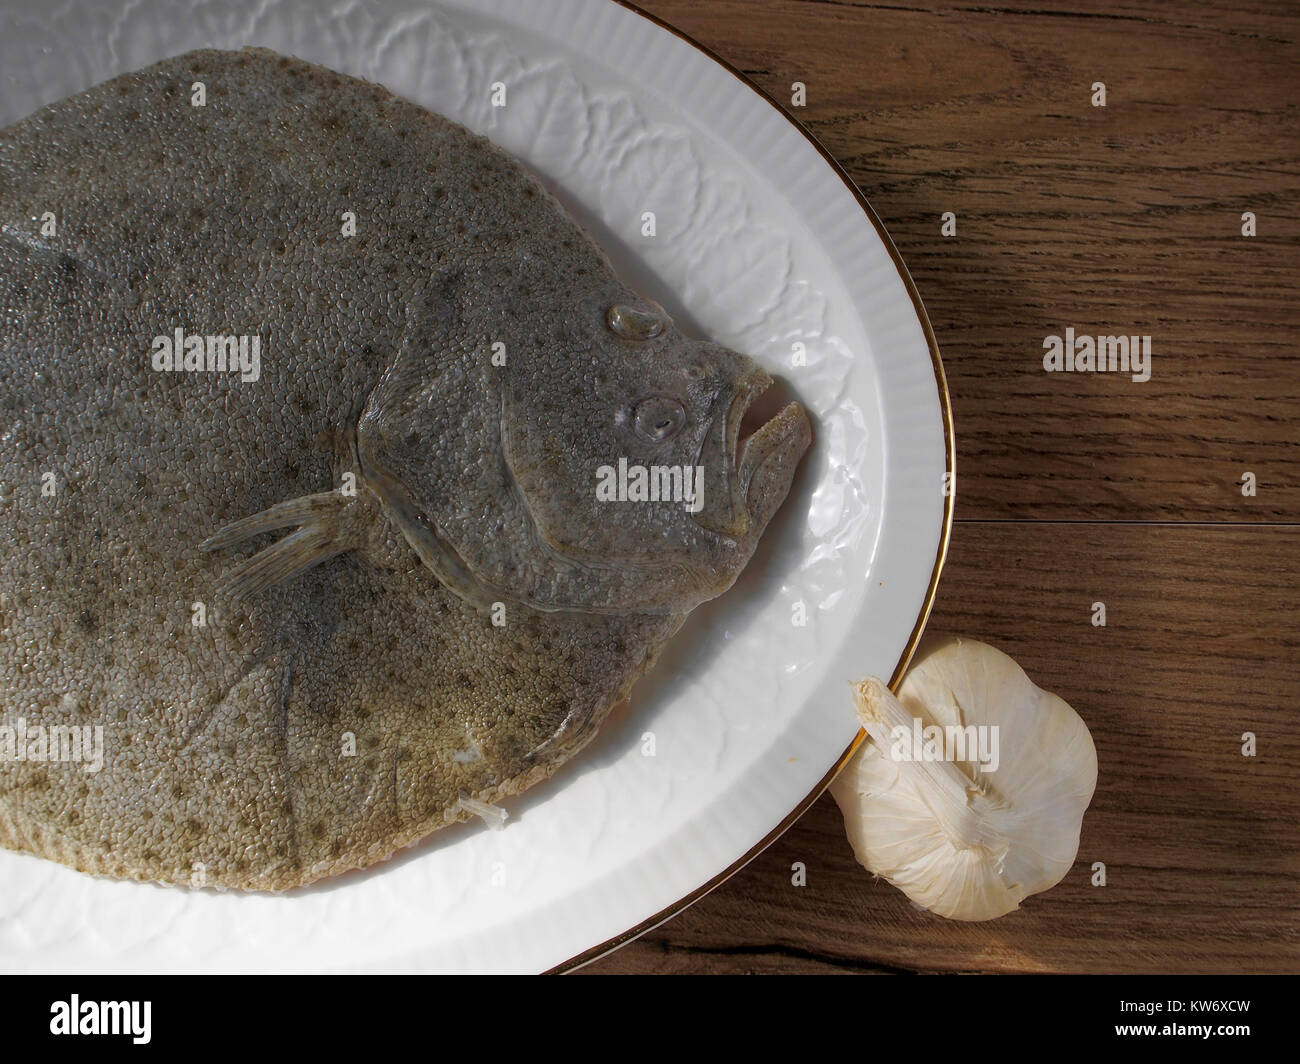 Turbot in a plate with garlic on wood background Stock Photo